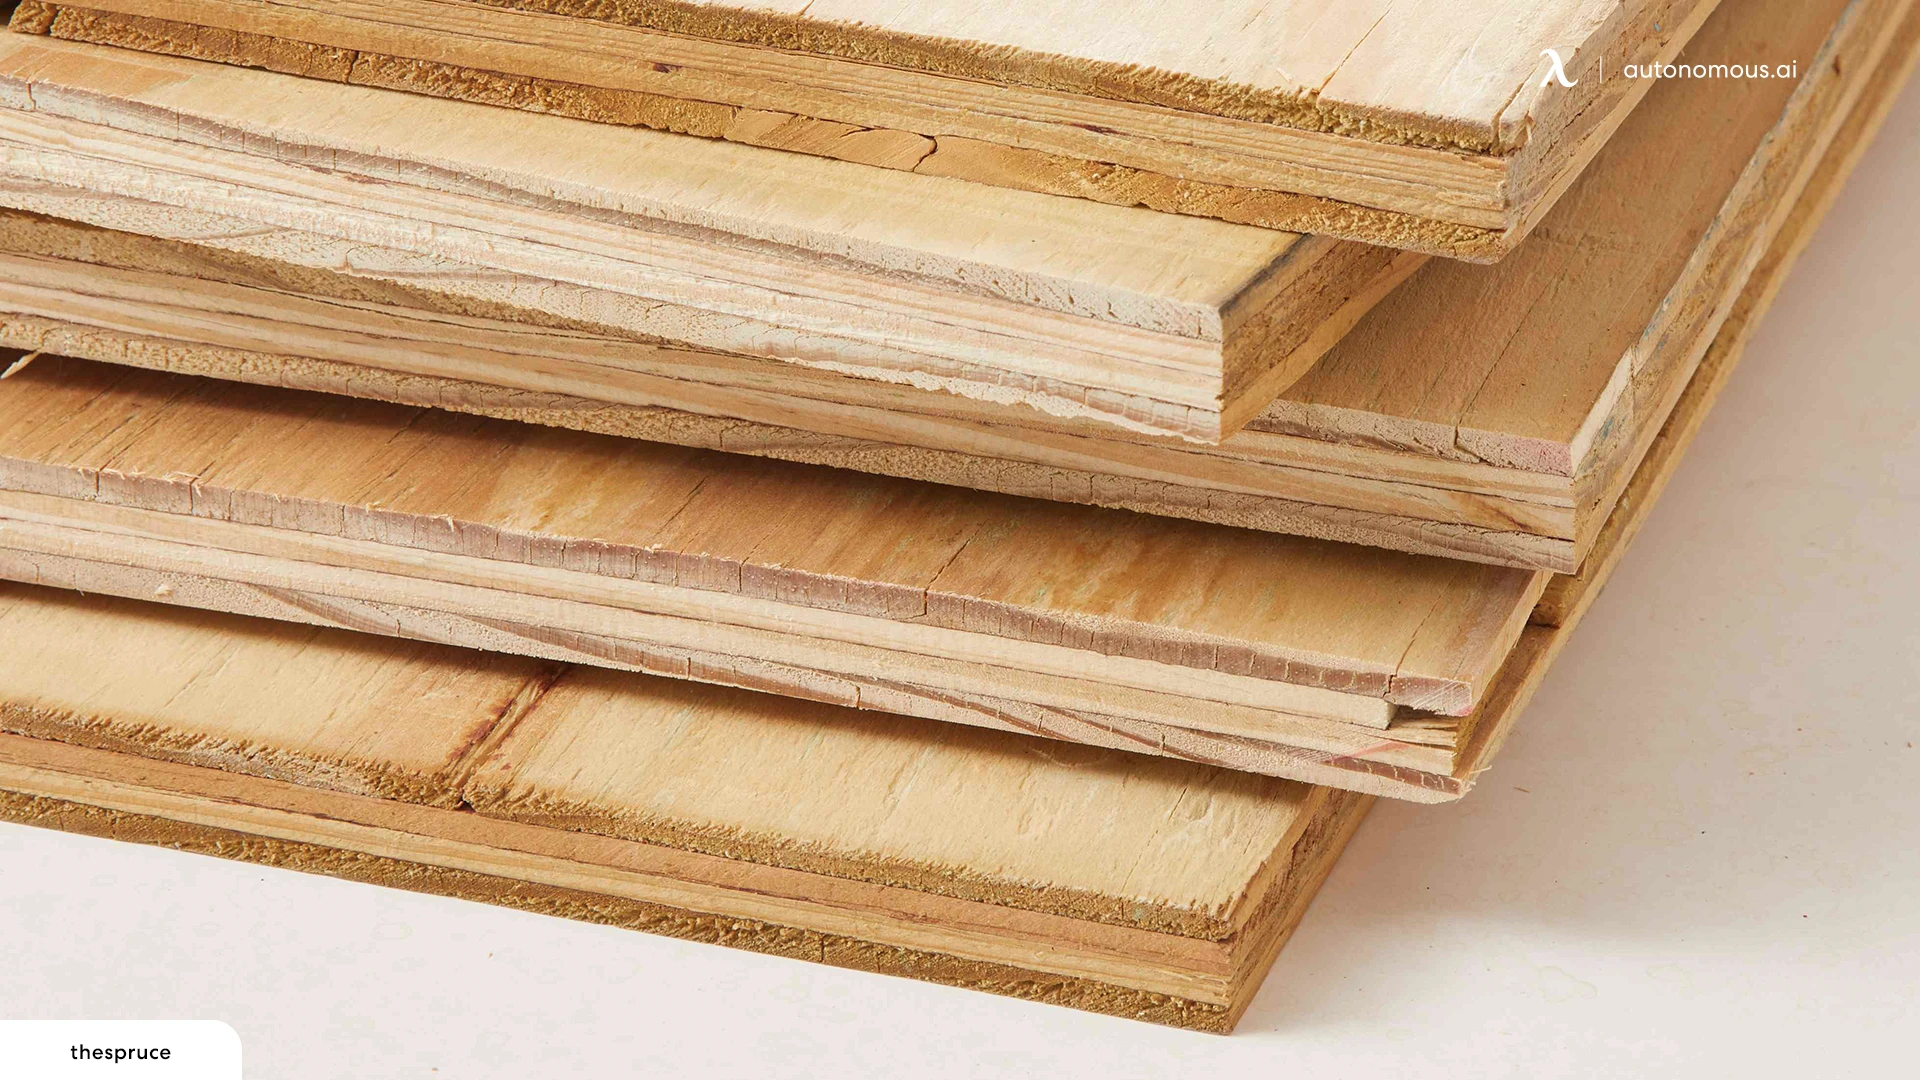 What Types of Wood Should Not Be Used?